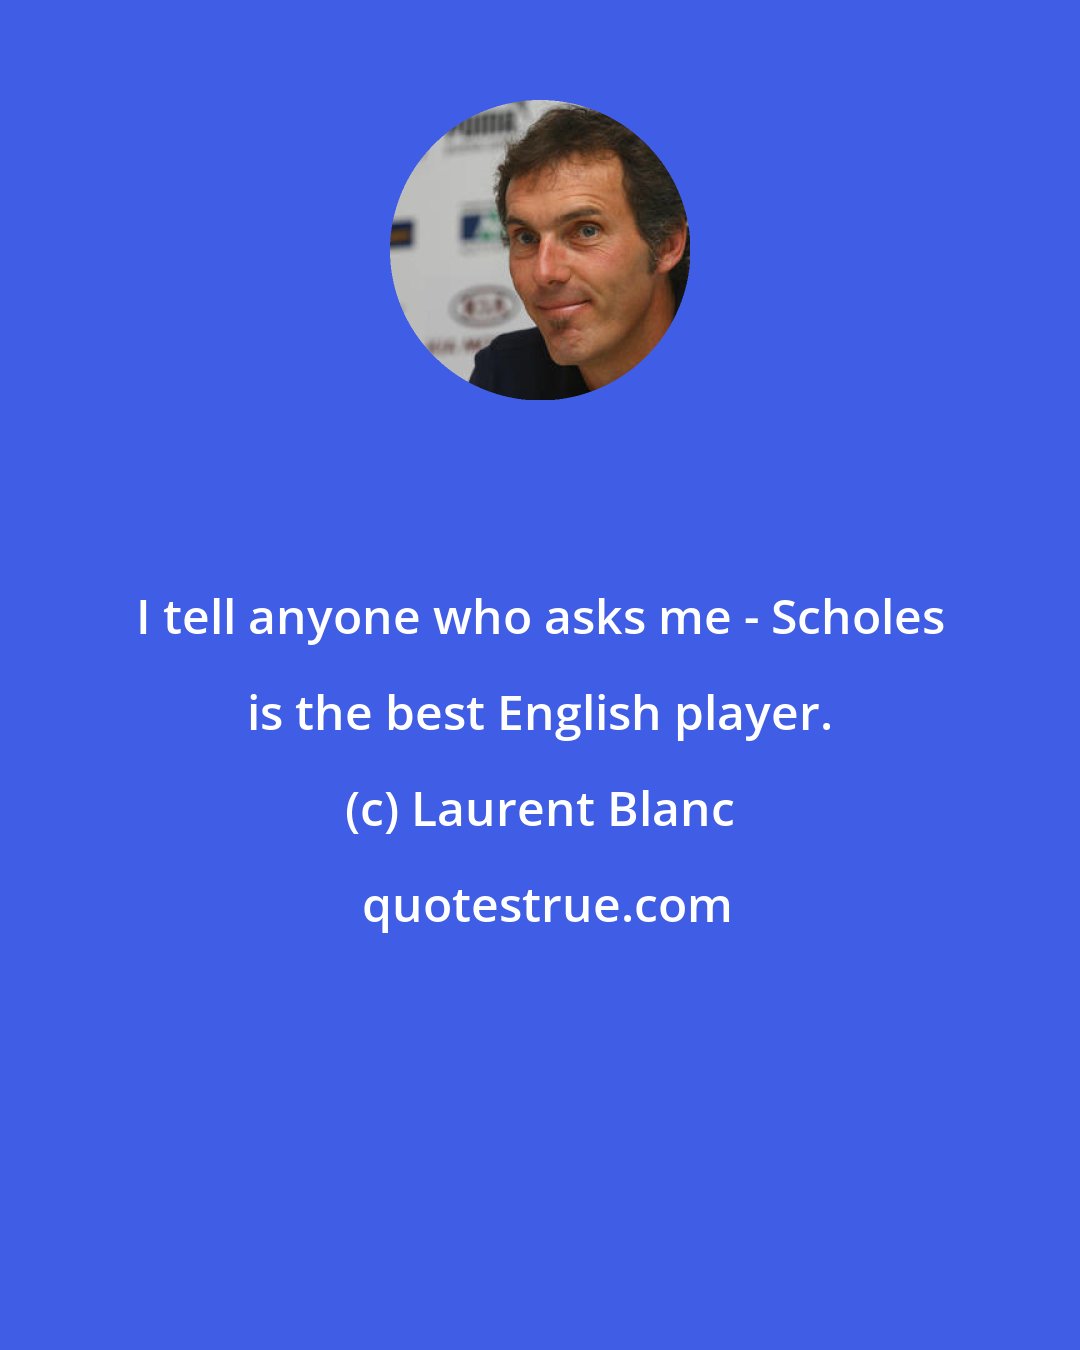 Laurent Blanc: I tell anyone who asks me - Scholes is the best English player.